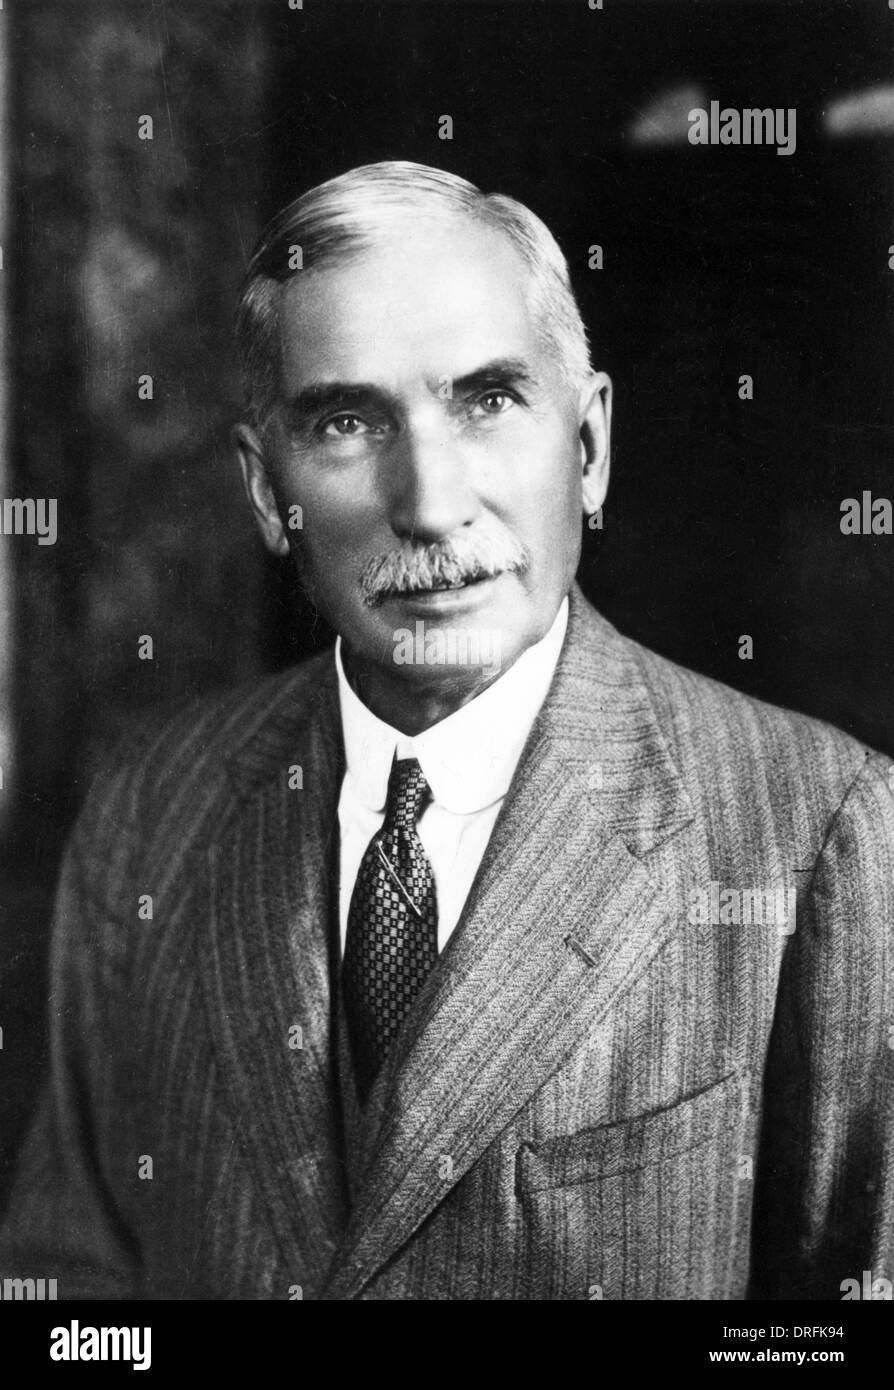 General J M B Hertzog, South African Prime Minister Stock Photo